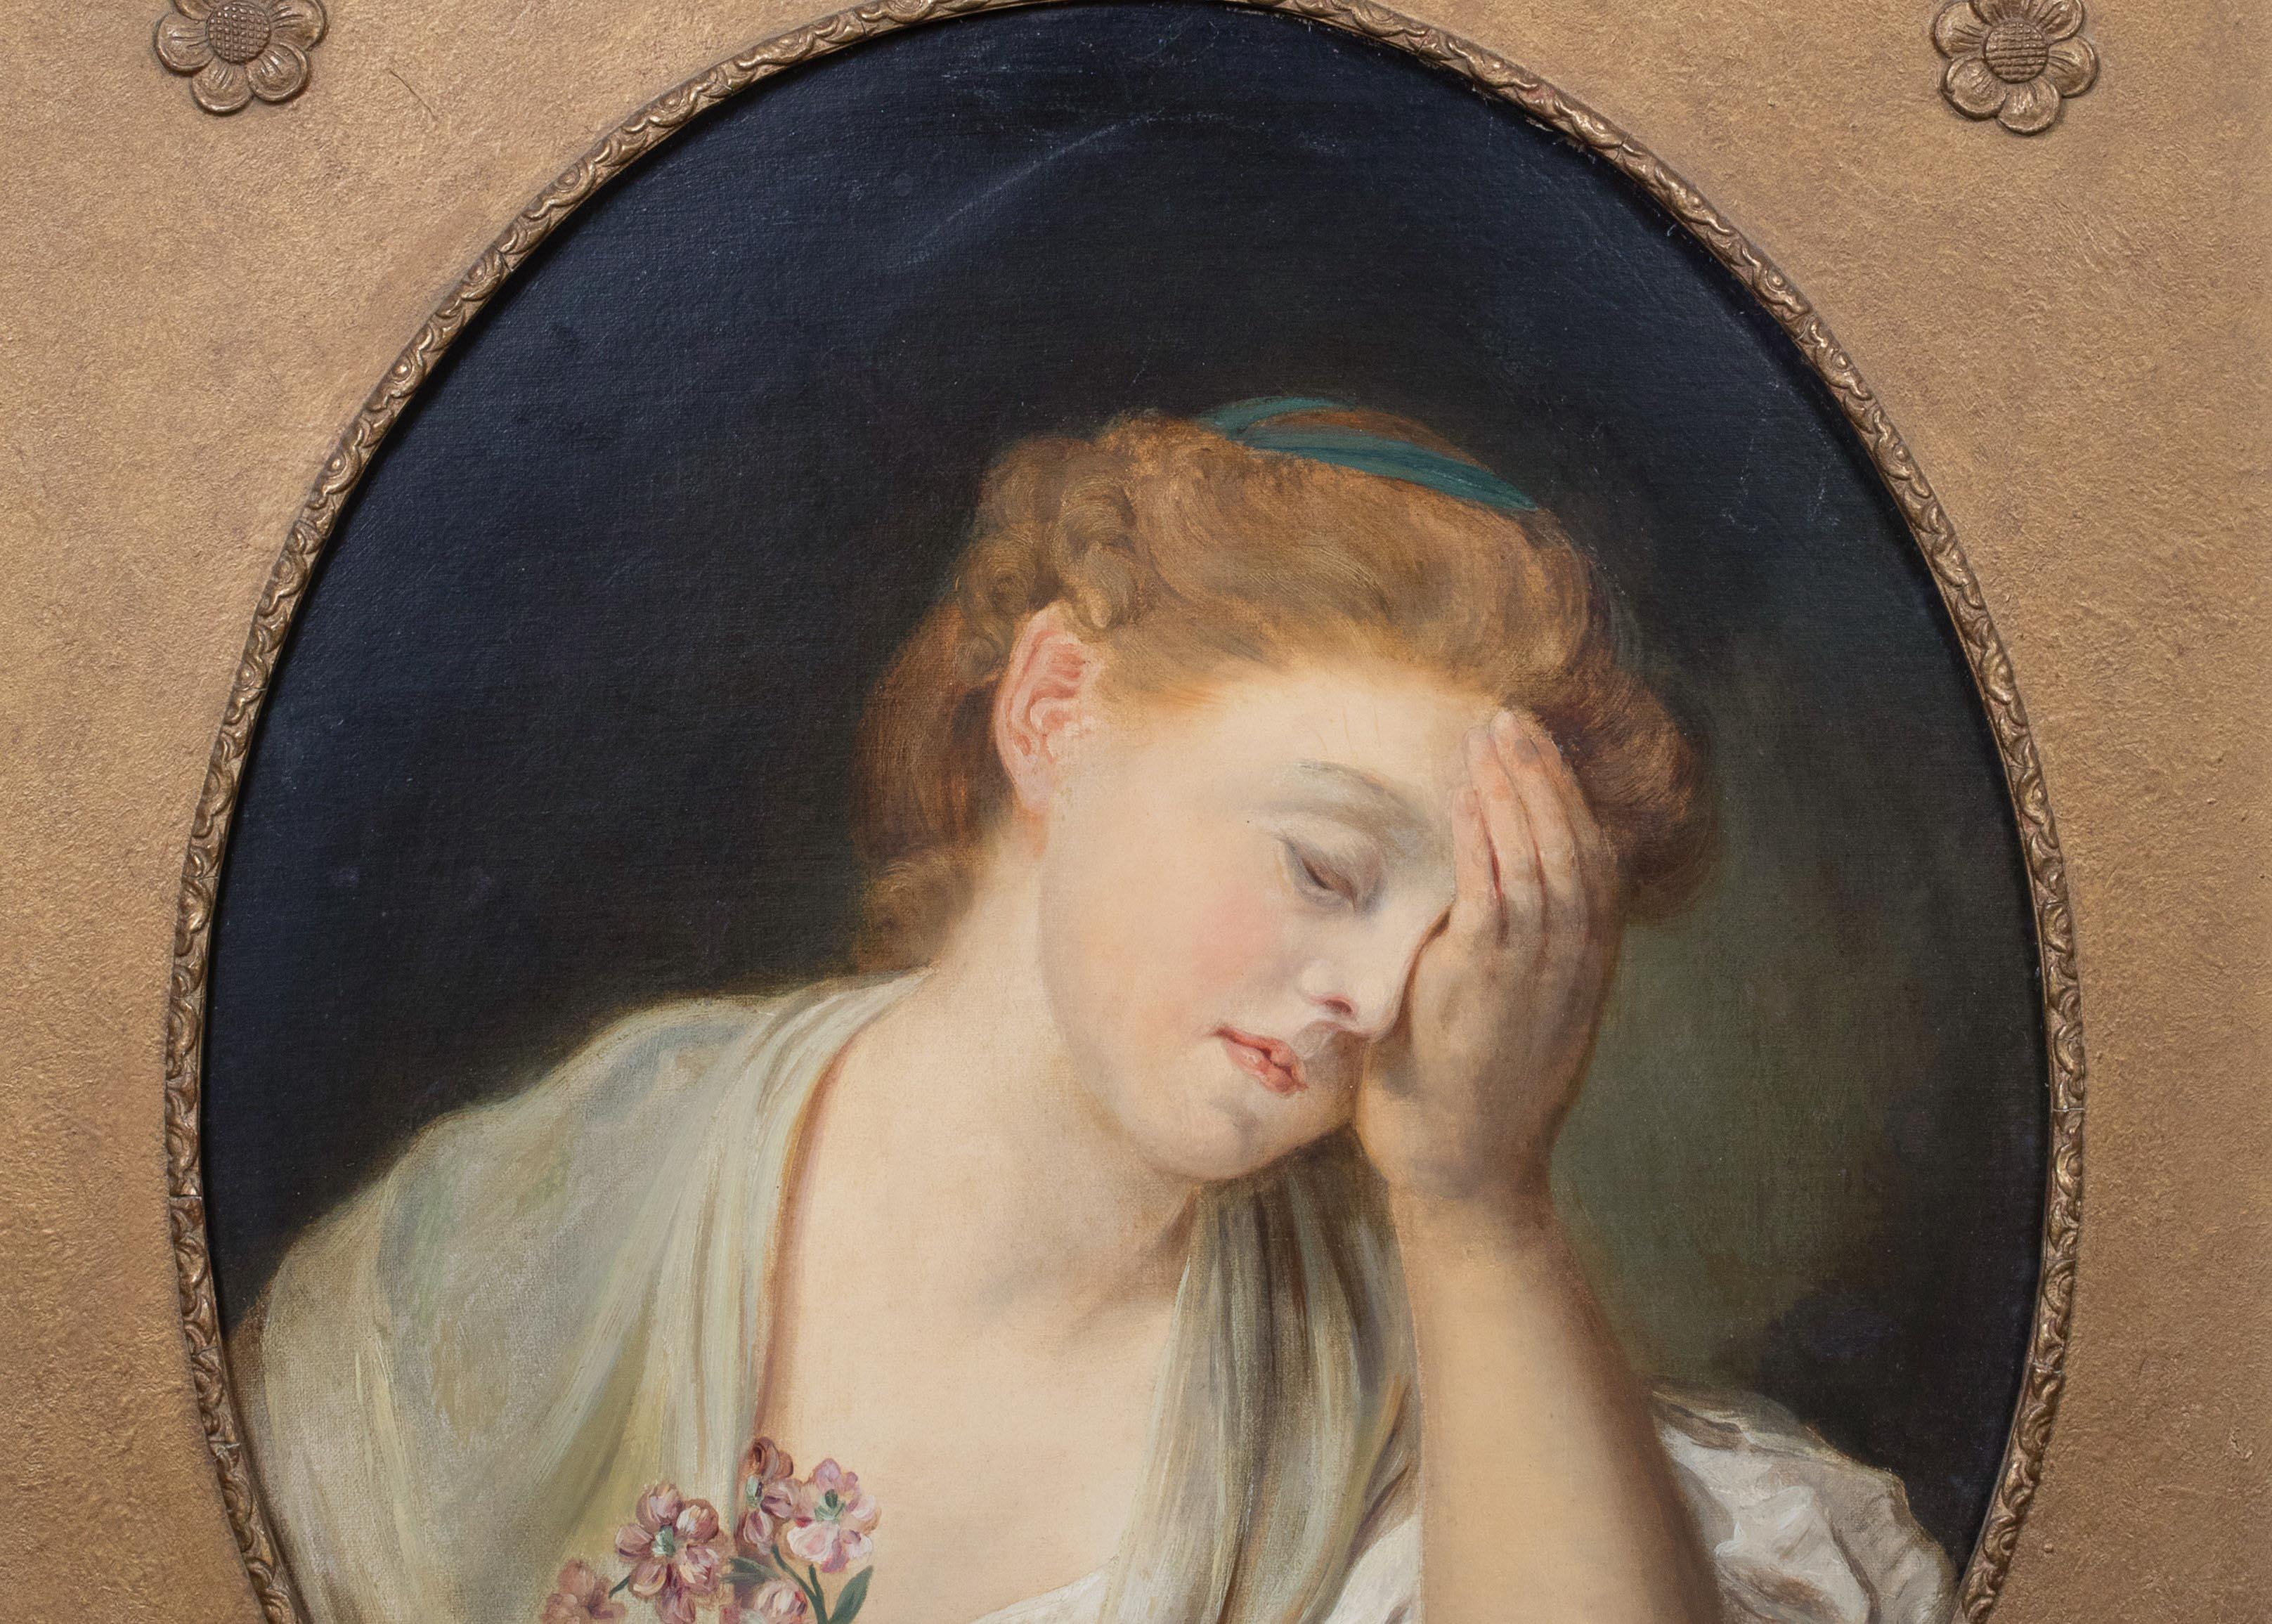 The Dead Canary, 18th Century - Brown Portrait Painting by Jean-Baptiste Greuze